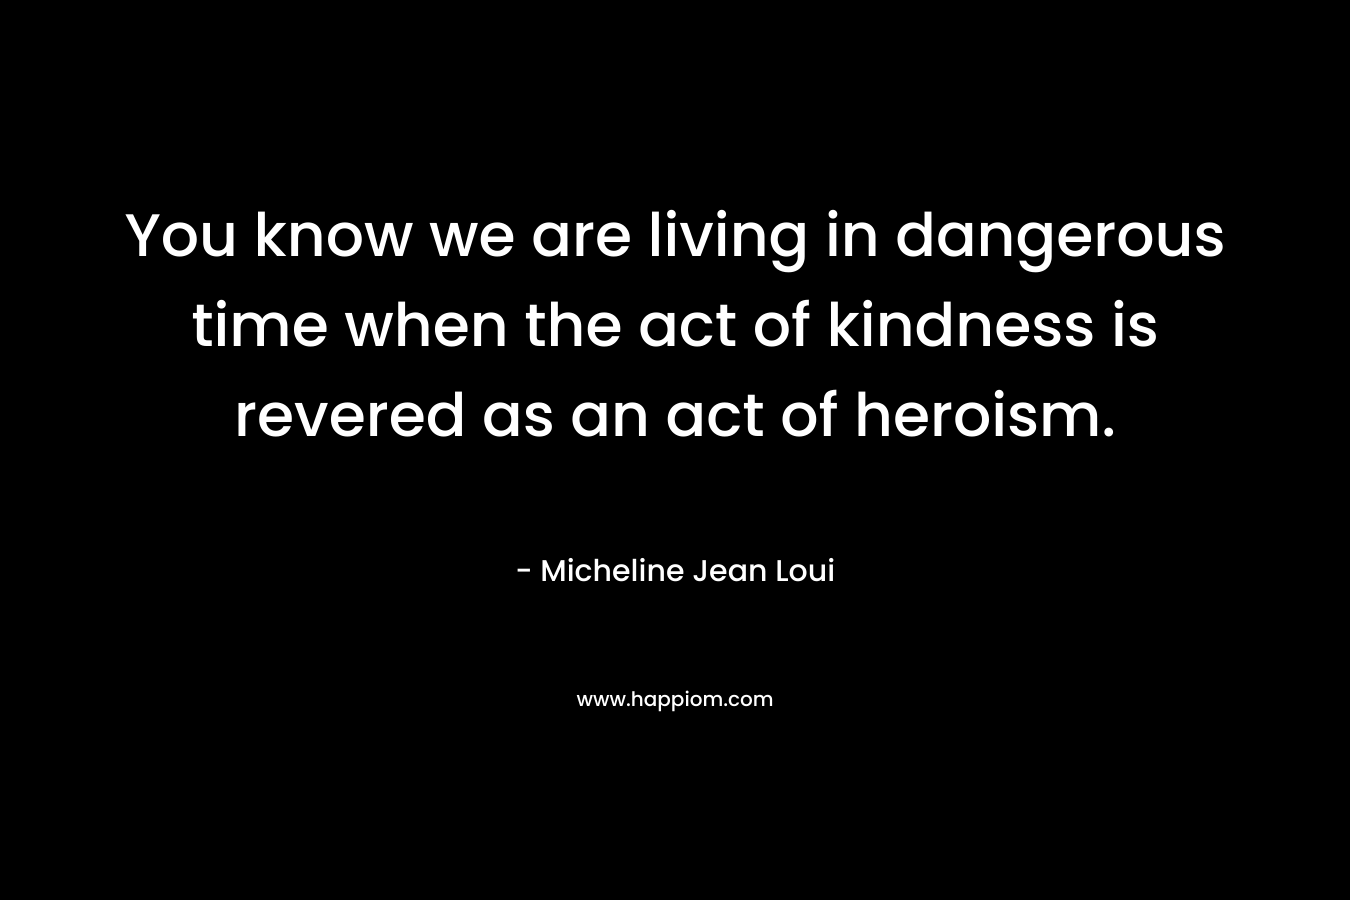 You know we are living in dangerous time when the act of kindness is revered as an act of heroism.